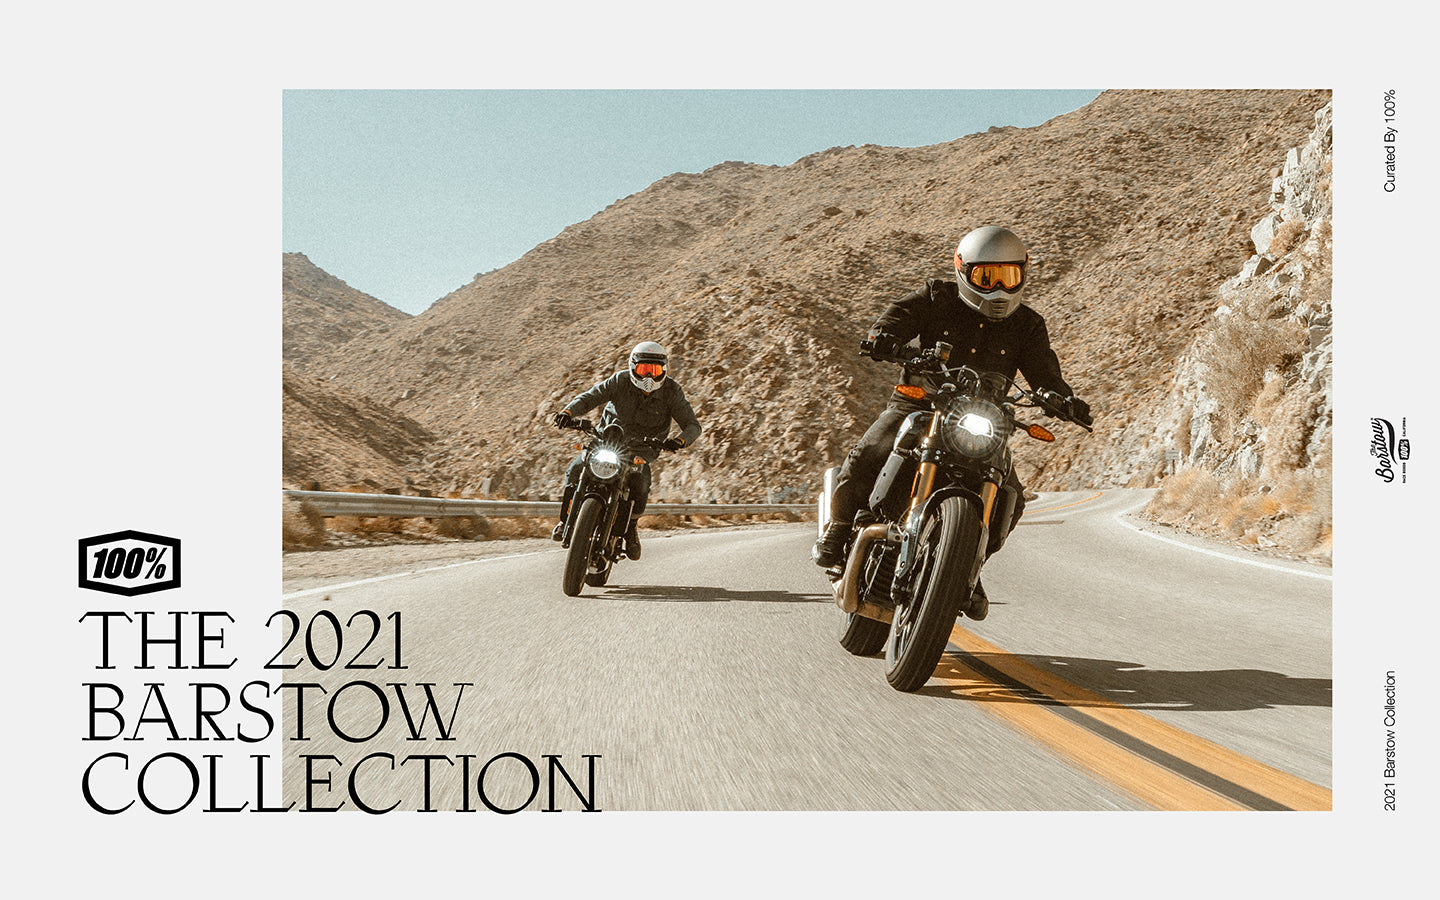 The 2021 Barstow Collection